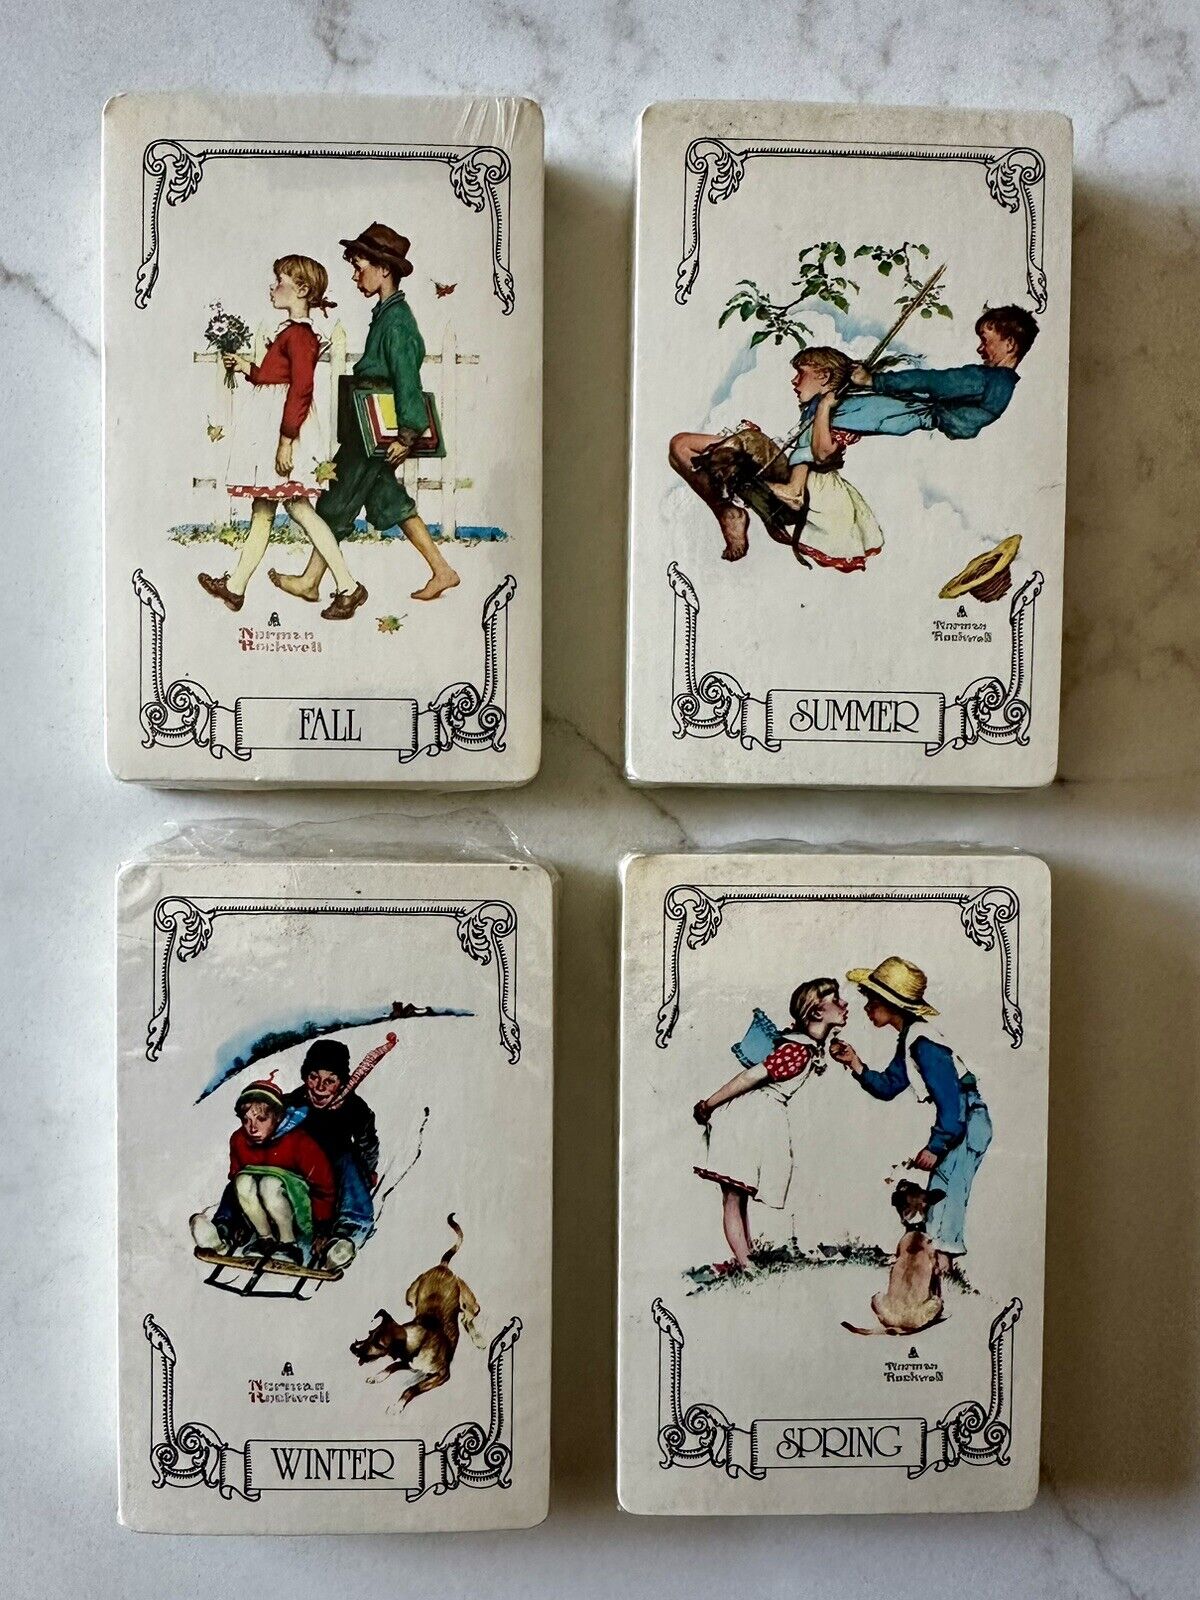 Vintage Norman Rockwell Playing Cards 4 Sealed Decks - 4 Seasons